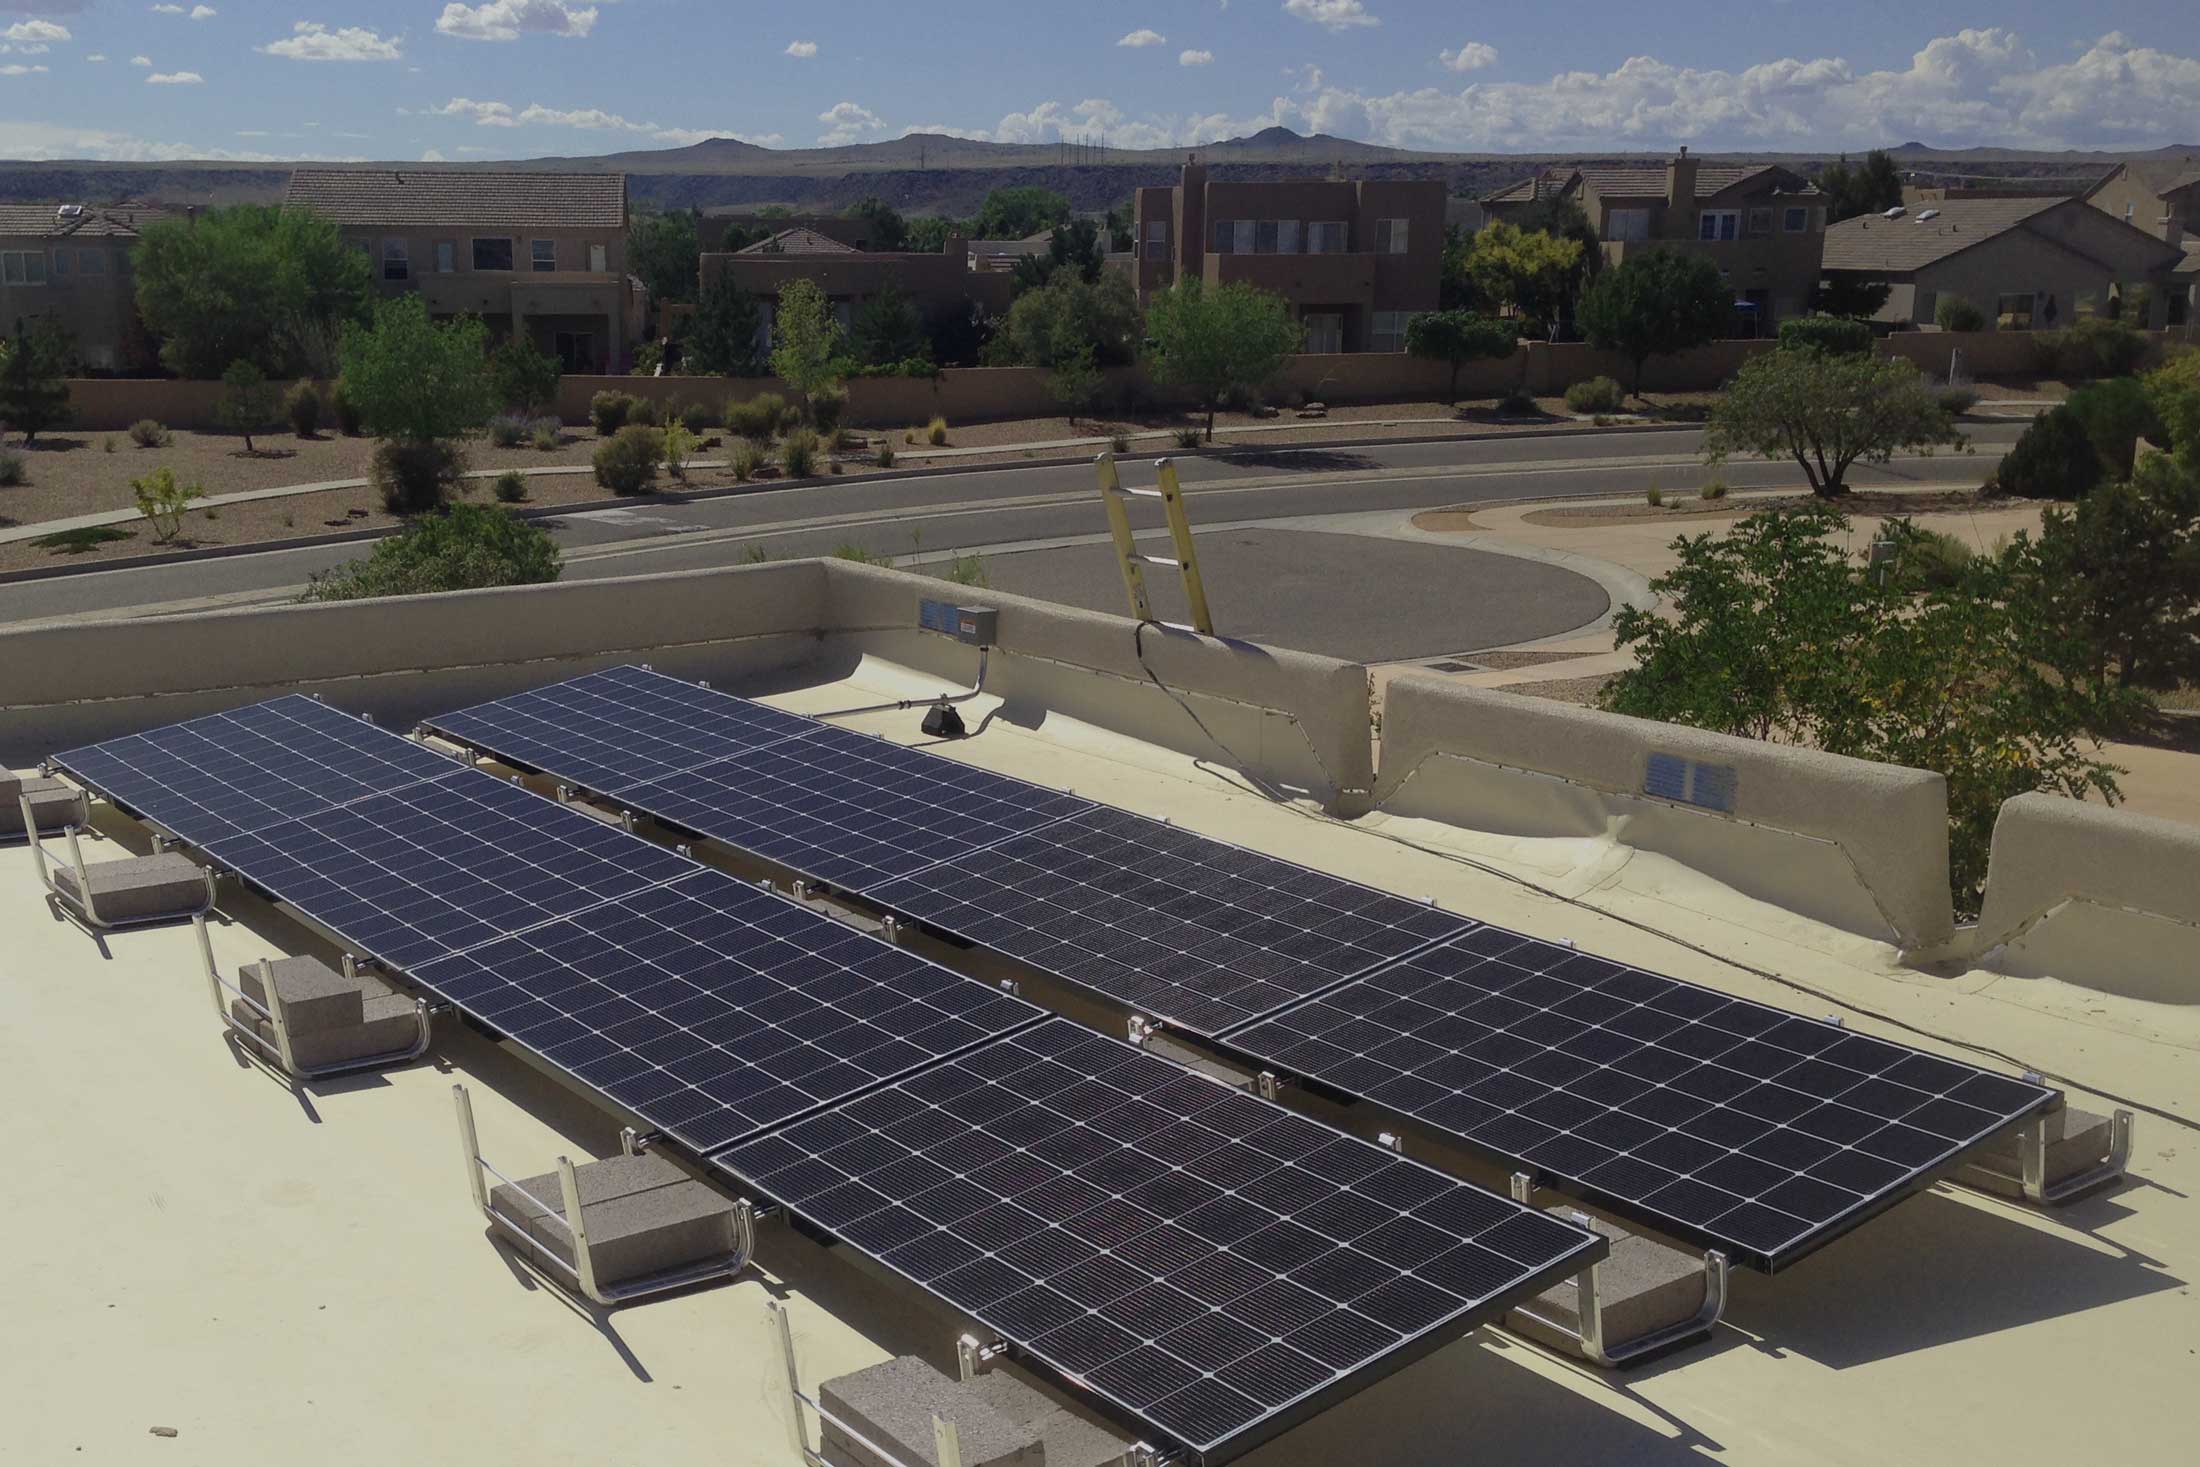 Select Solar is focused on designing and installing high quality, durable solar electric systems for residential, commercial and industrial customers